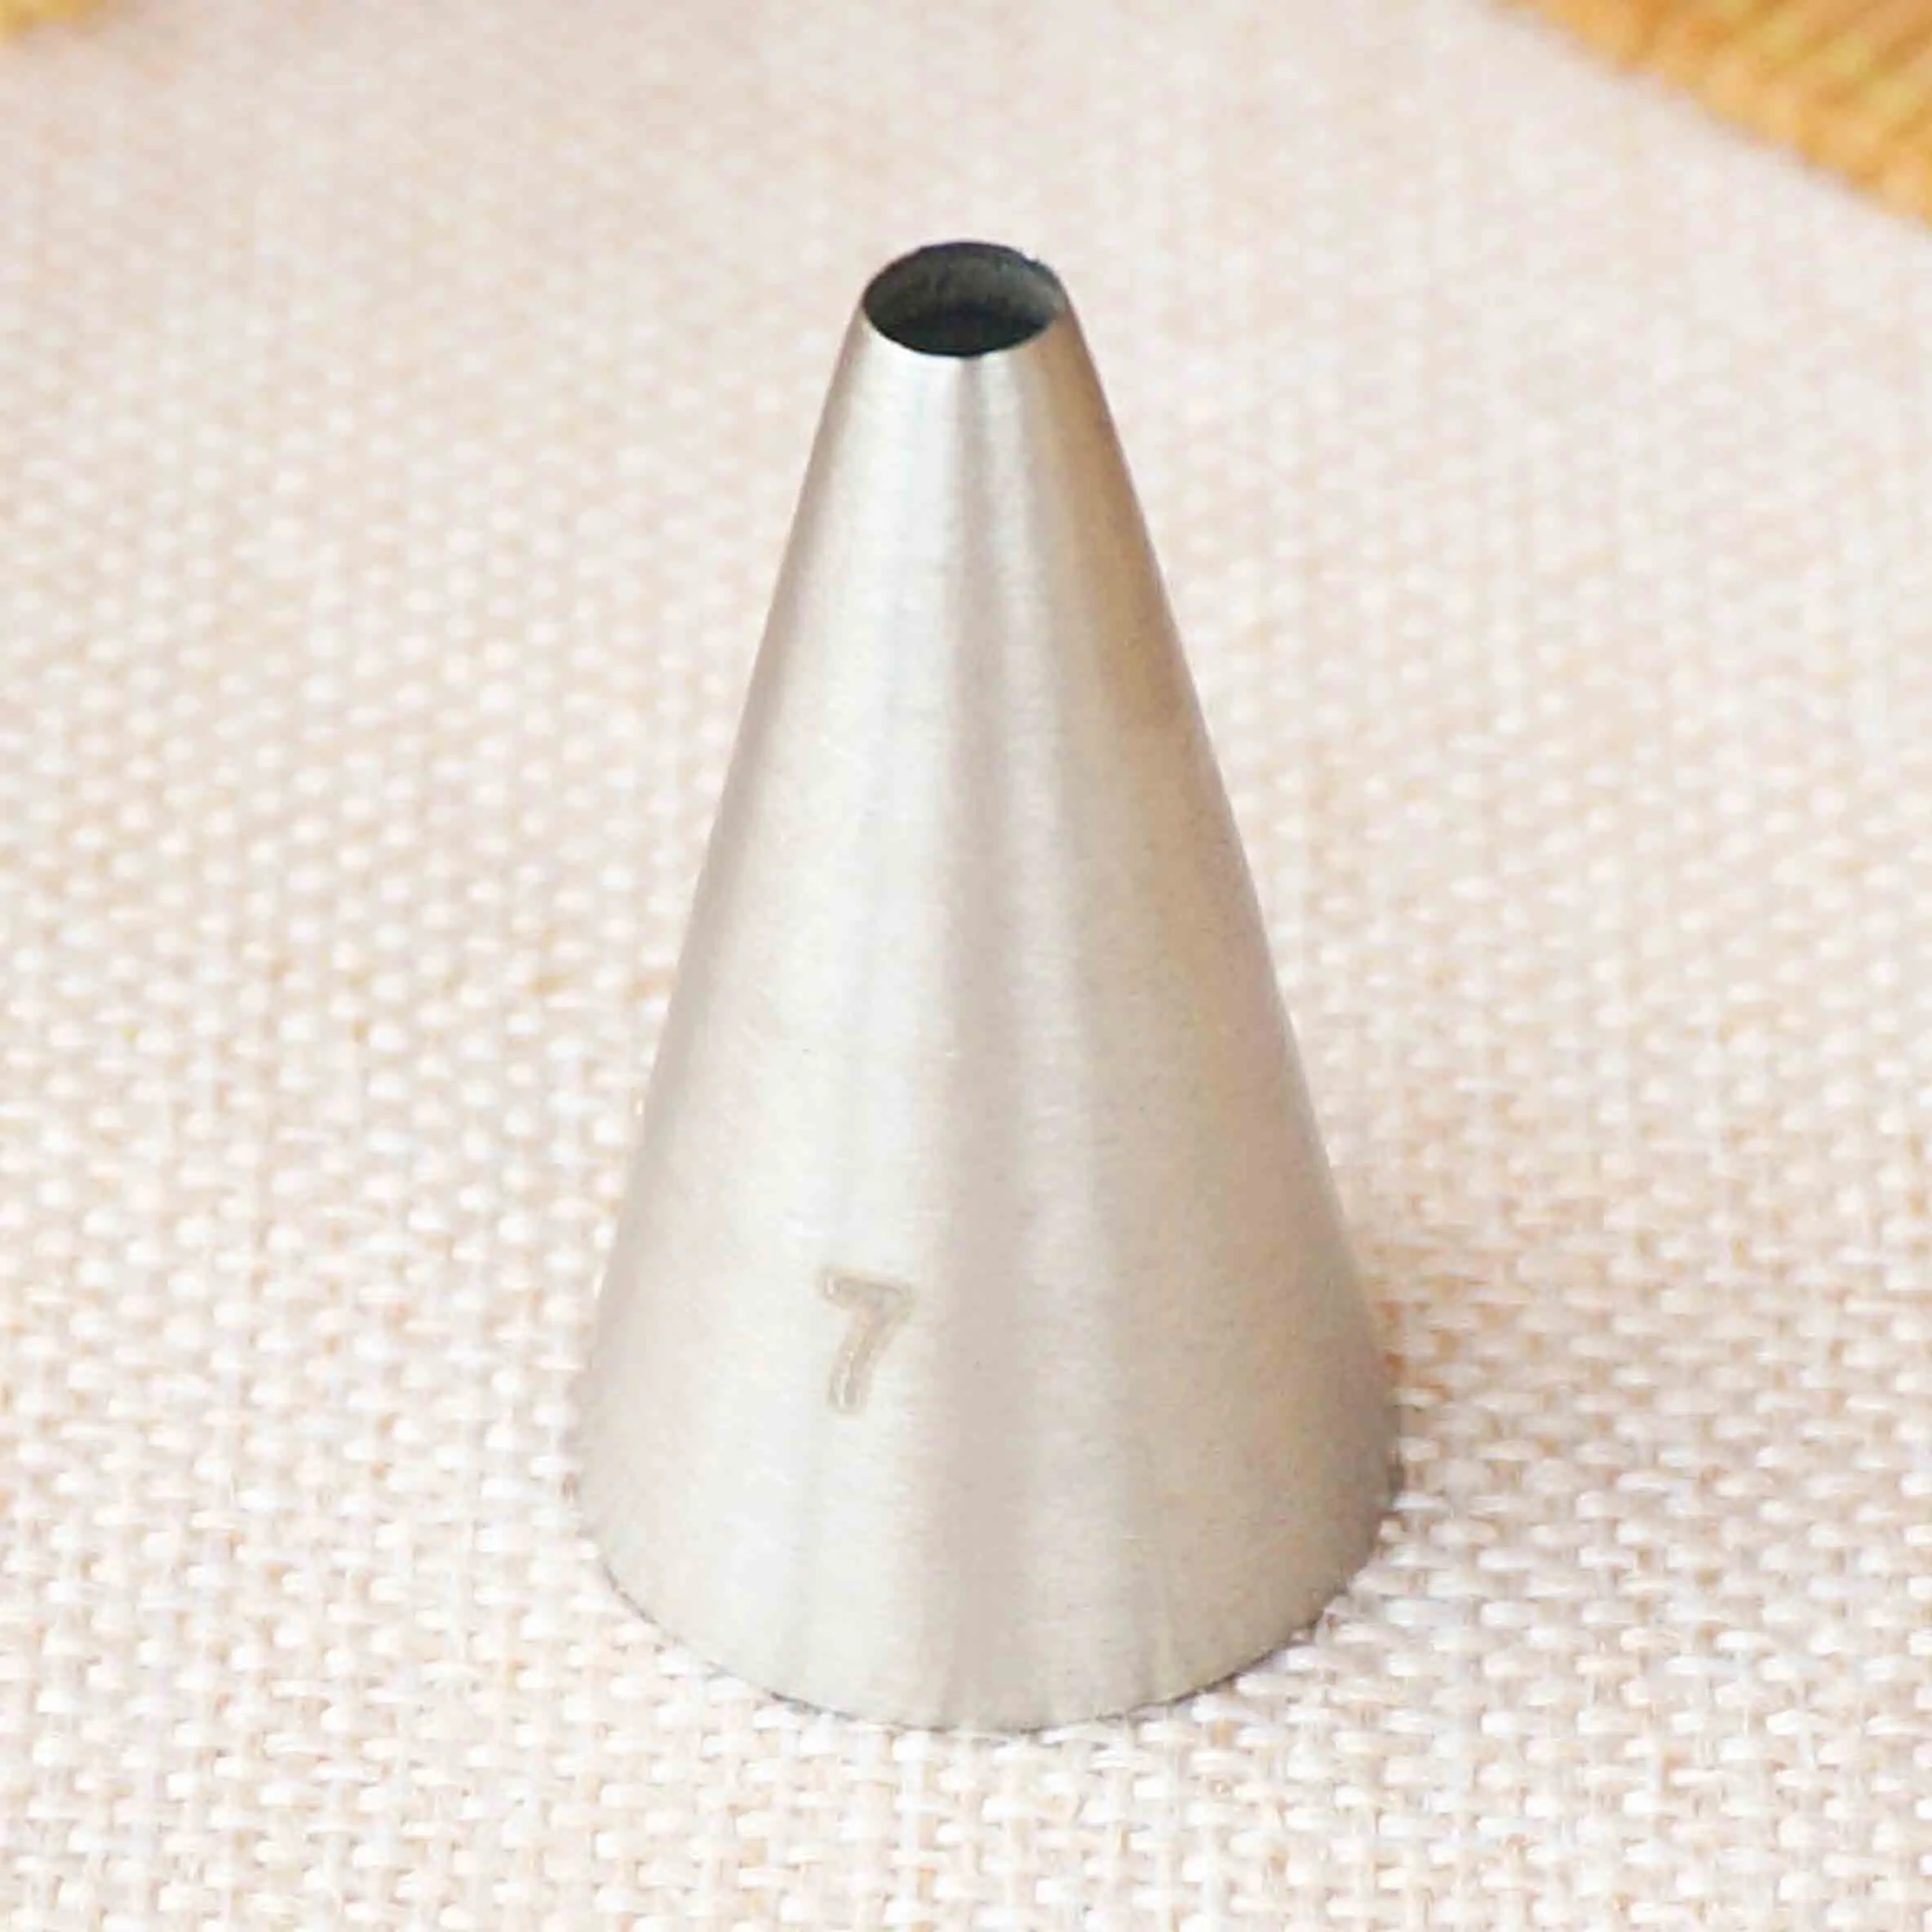 

#7 Round Piping Tip Decorating Mouth Nozzle Pastry Tips Fondant Cake Decorating Sugarcraft Tool Bakeware Pull Line